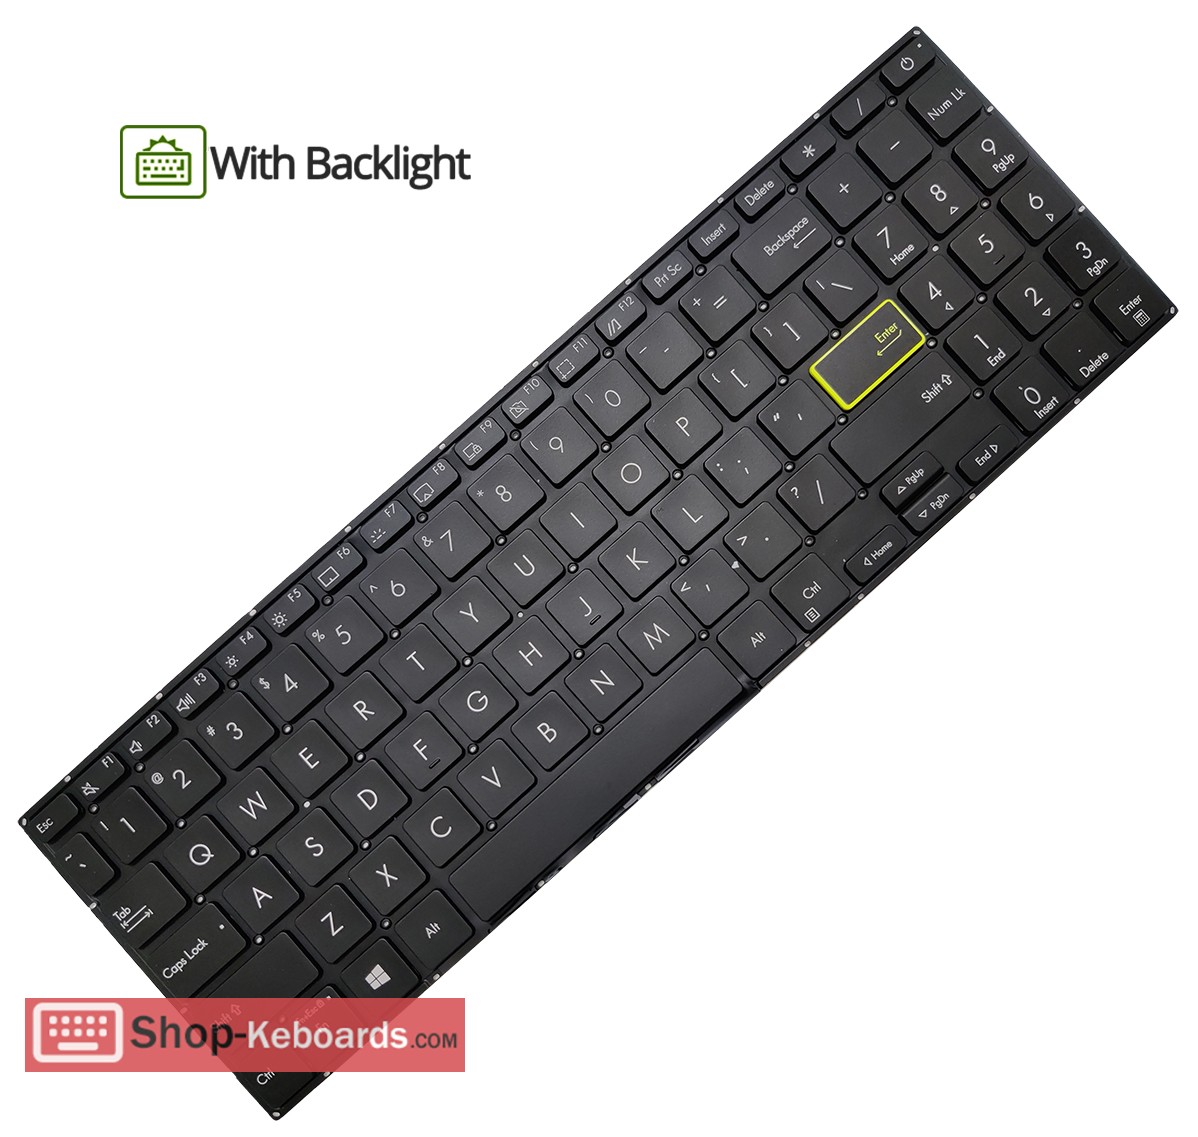 Asus 0KNB0-560KBE00  Keyboard replacement